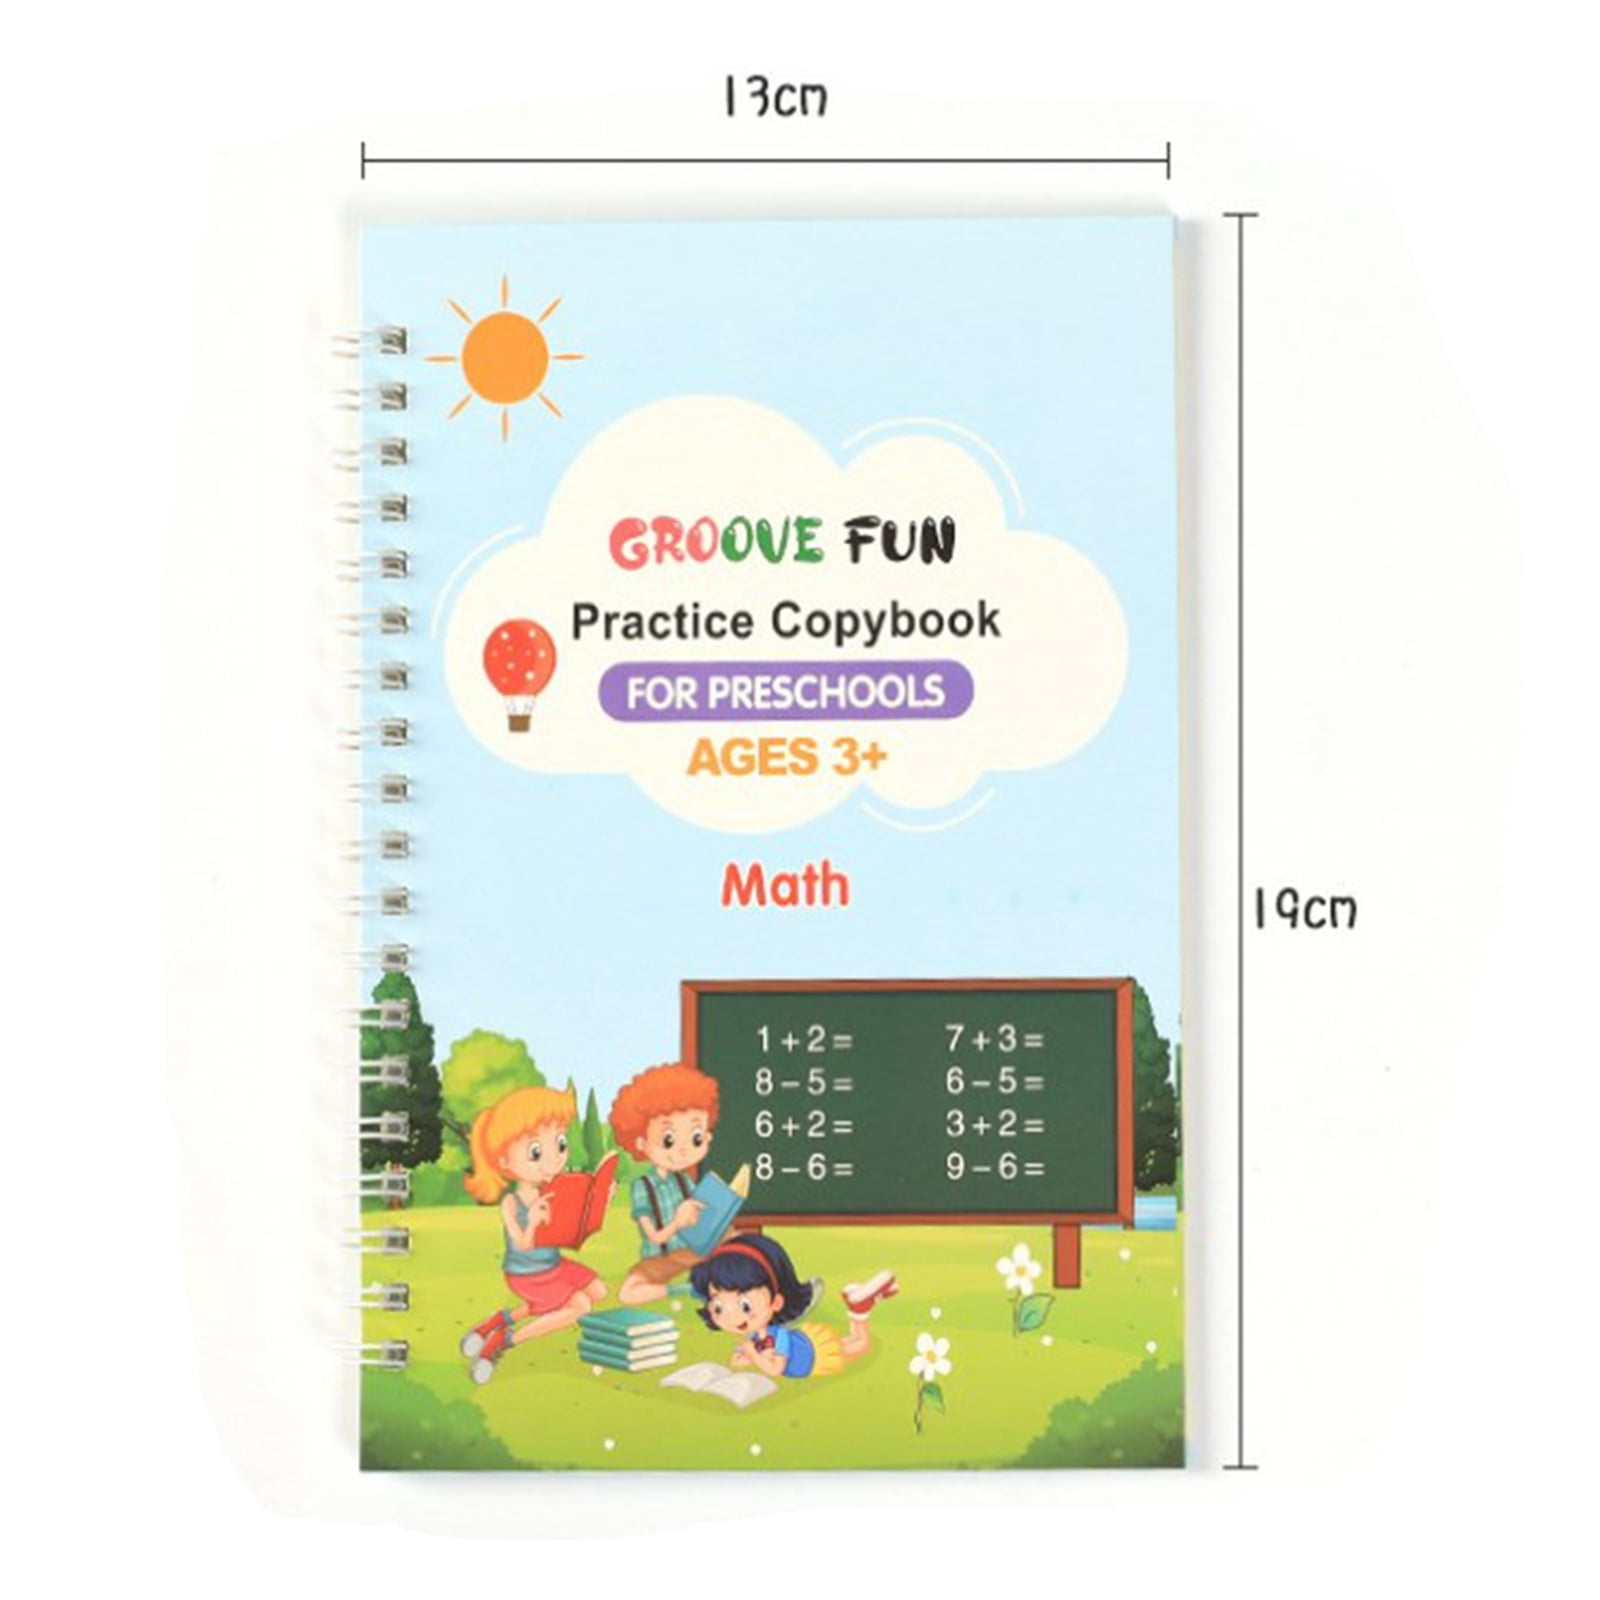 Preschools Grooves Template Design And Handwriting Aid Magic: Buy  Preschools Grooves Template Design And Handwriting Aid Magic by Novelty at  Low Price in India